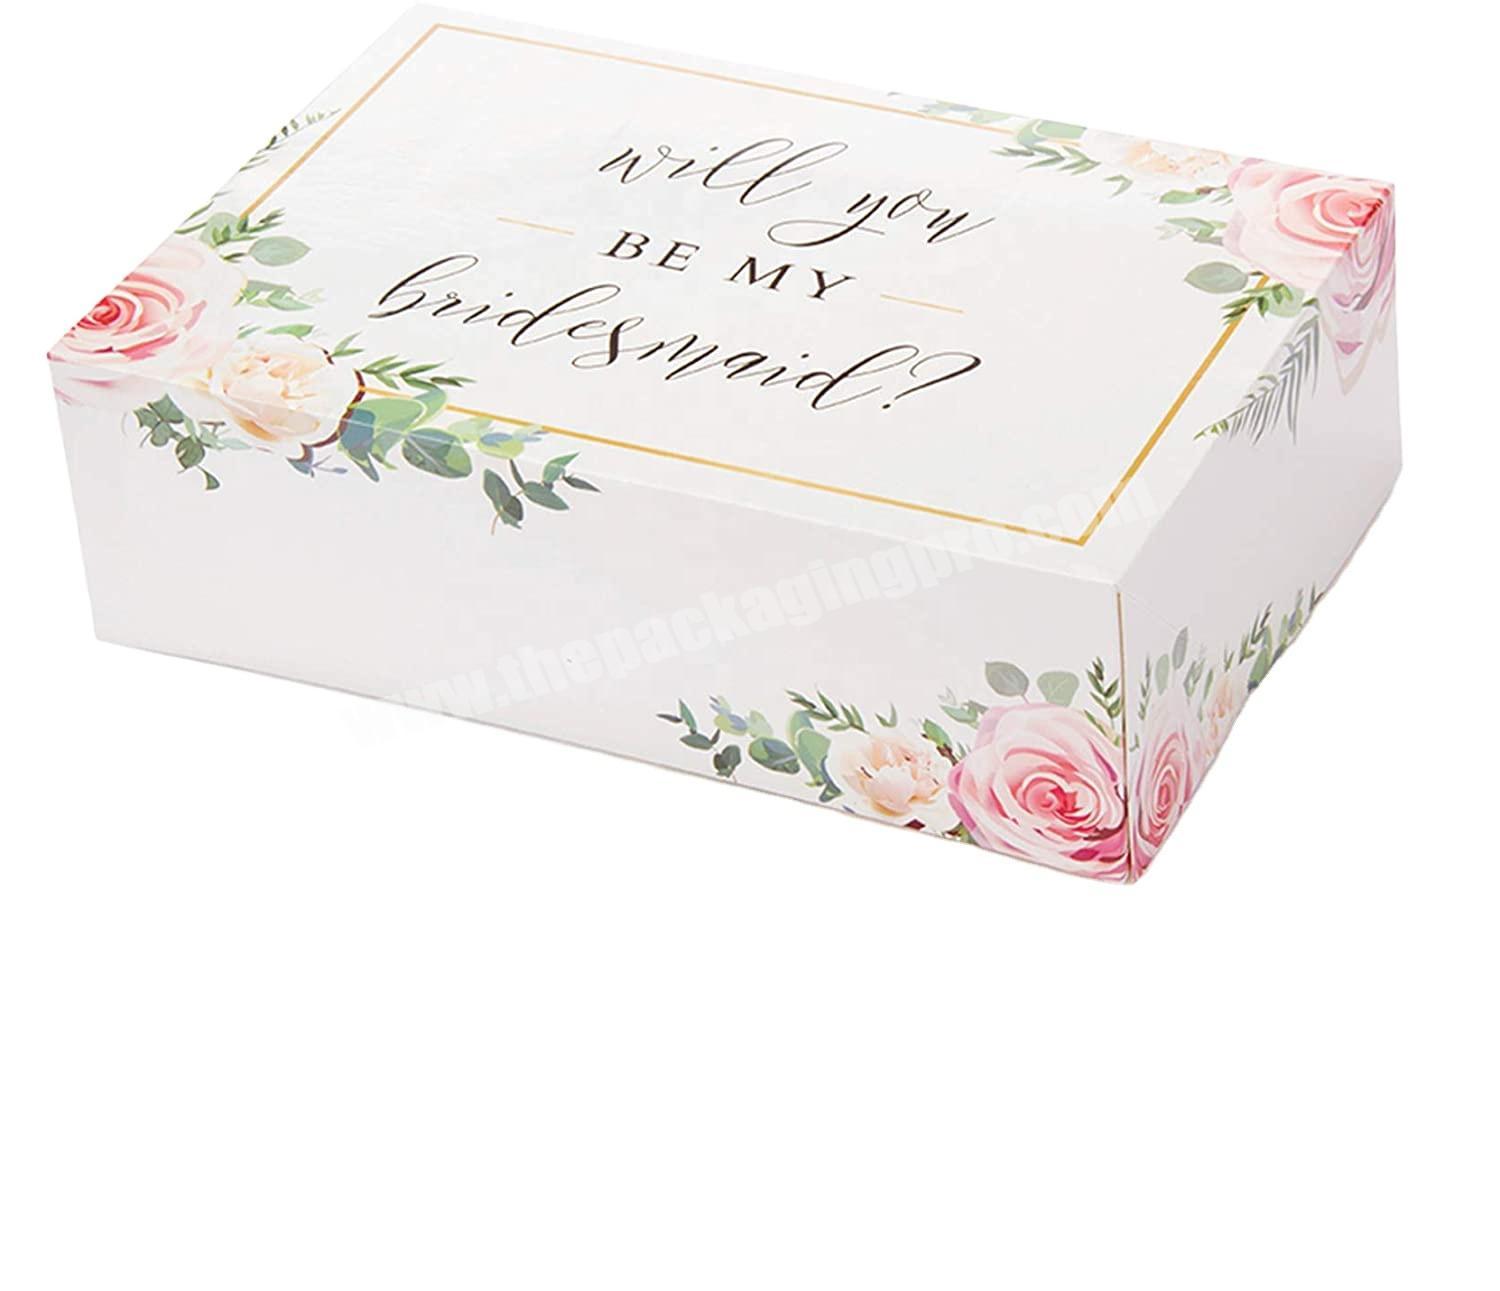 Bridesmaid gift packing boxes will you be my maid of honor proposal box